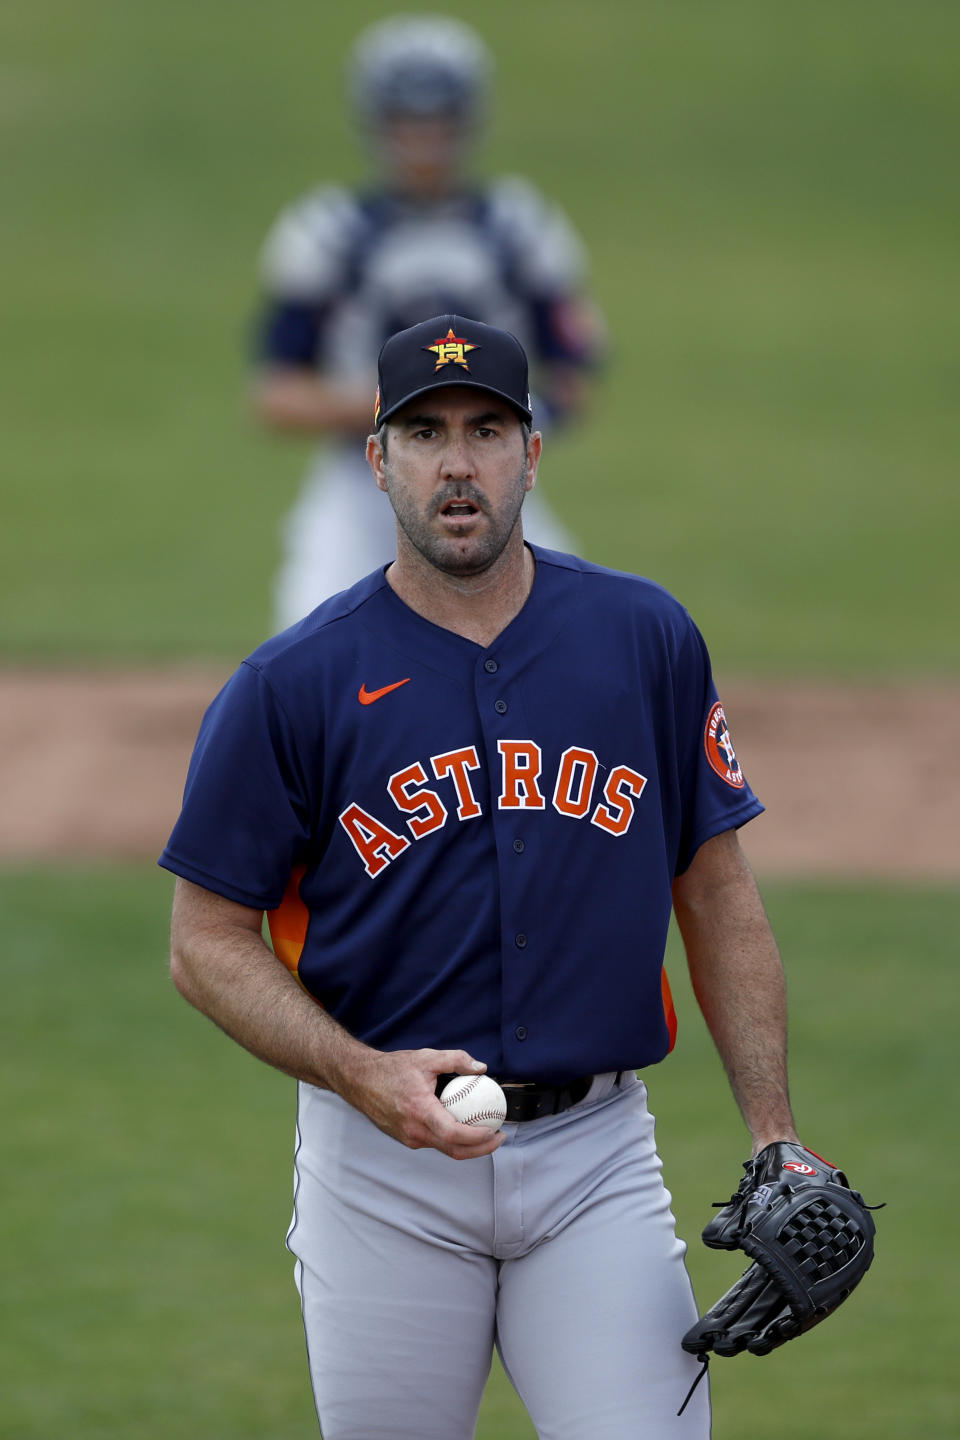 Houston Astros pitcher Justin Verlander warms up prior to a spring training baseball game against the St. Louis Cardinals, Tuesday, March 3, 2020, in Jupiter, Fla. (AP Photo/Julio Cortez)